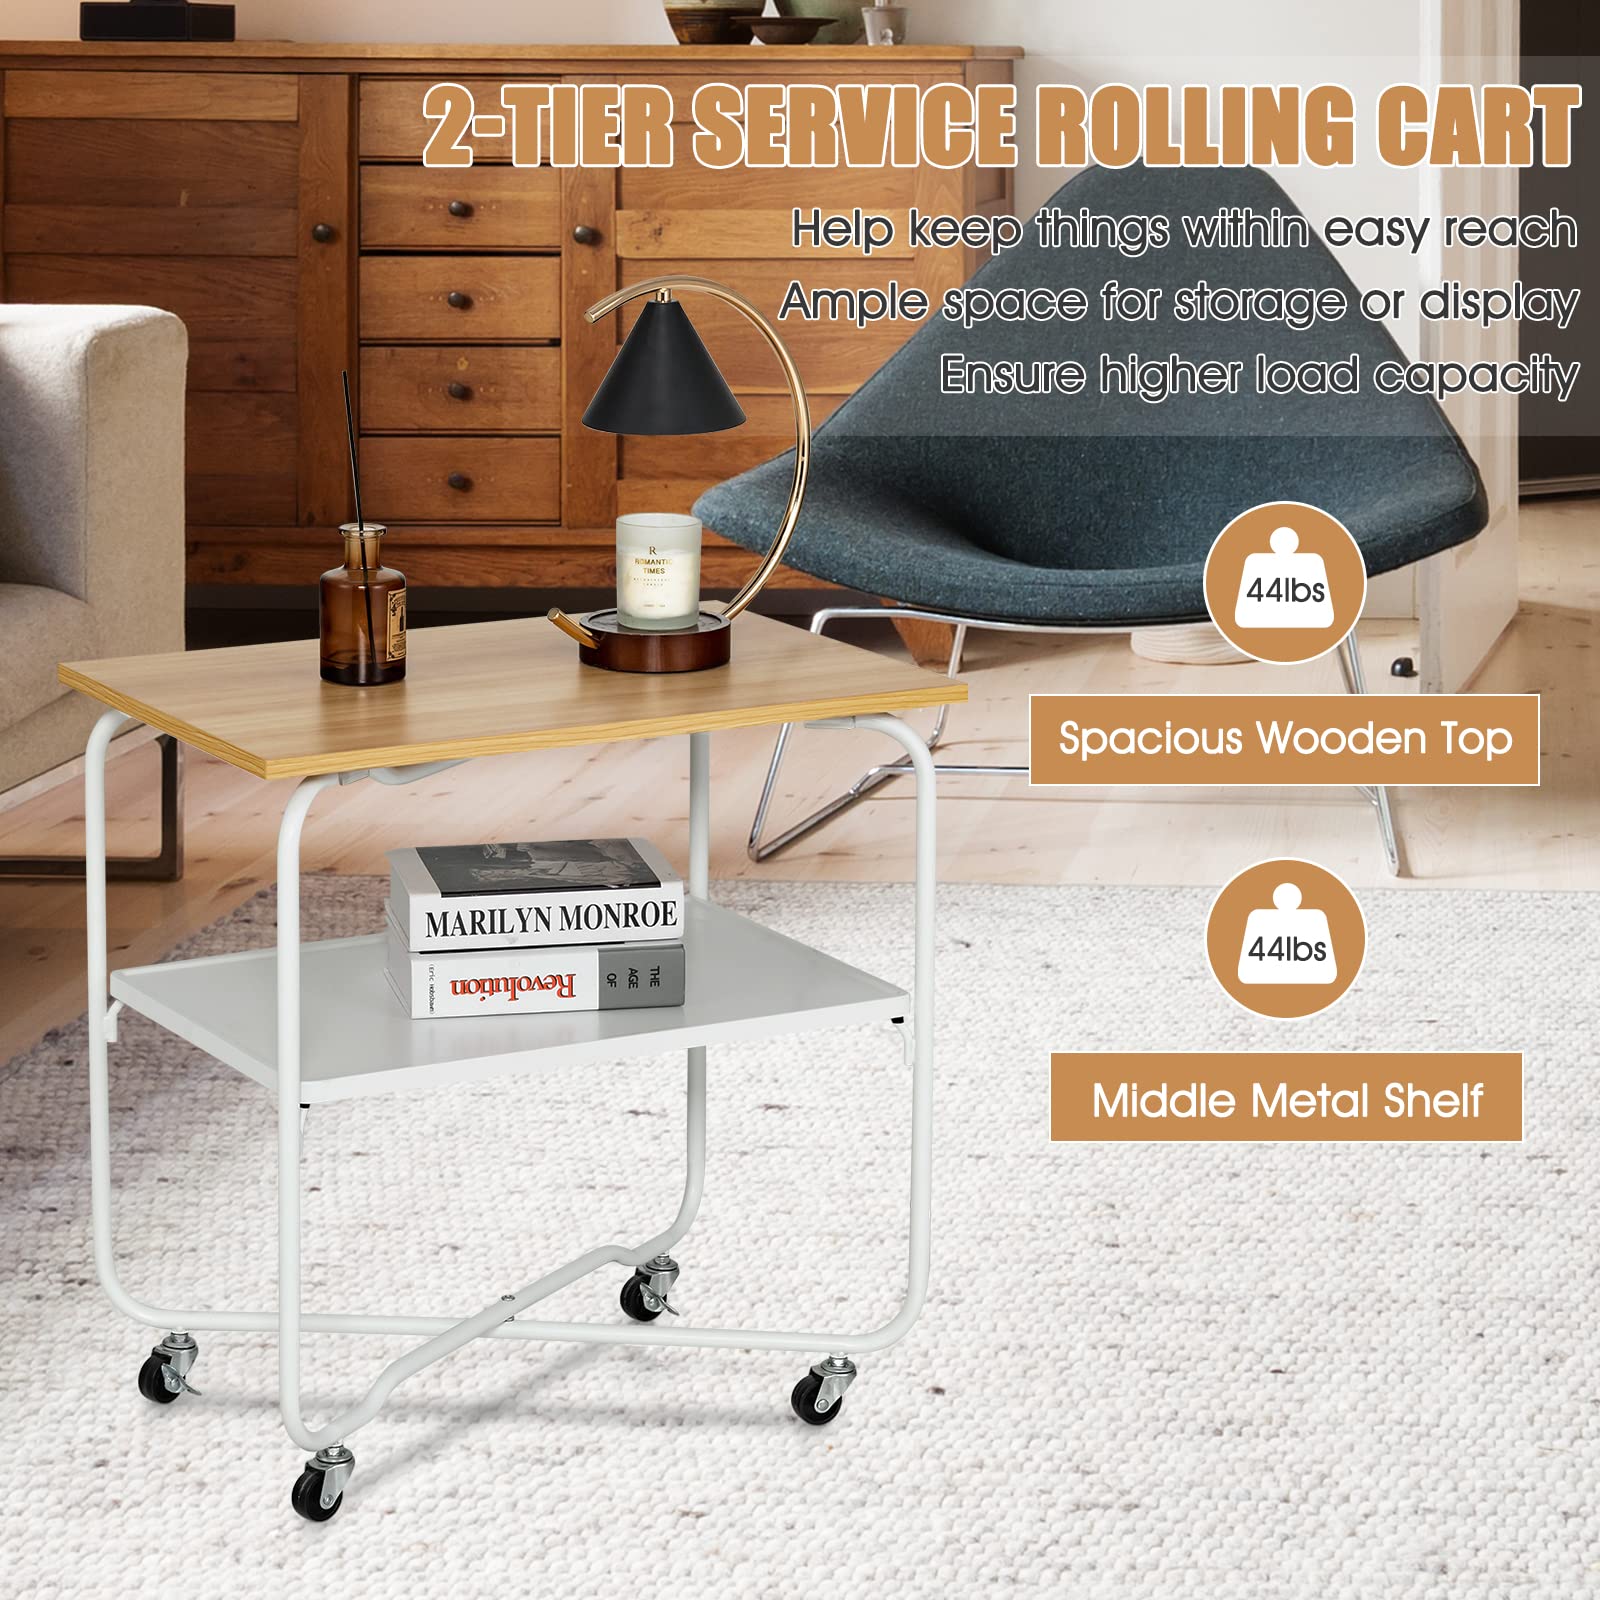 End Table on Wheels, 2-Tier Rolling Storage Cart - Giantex